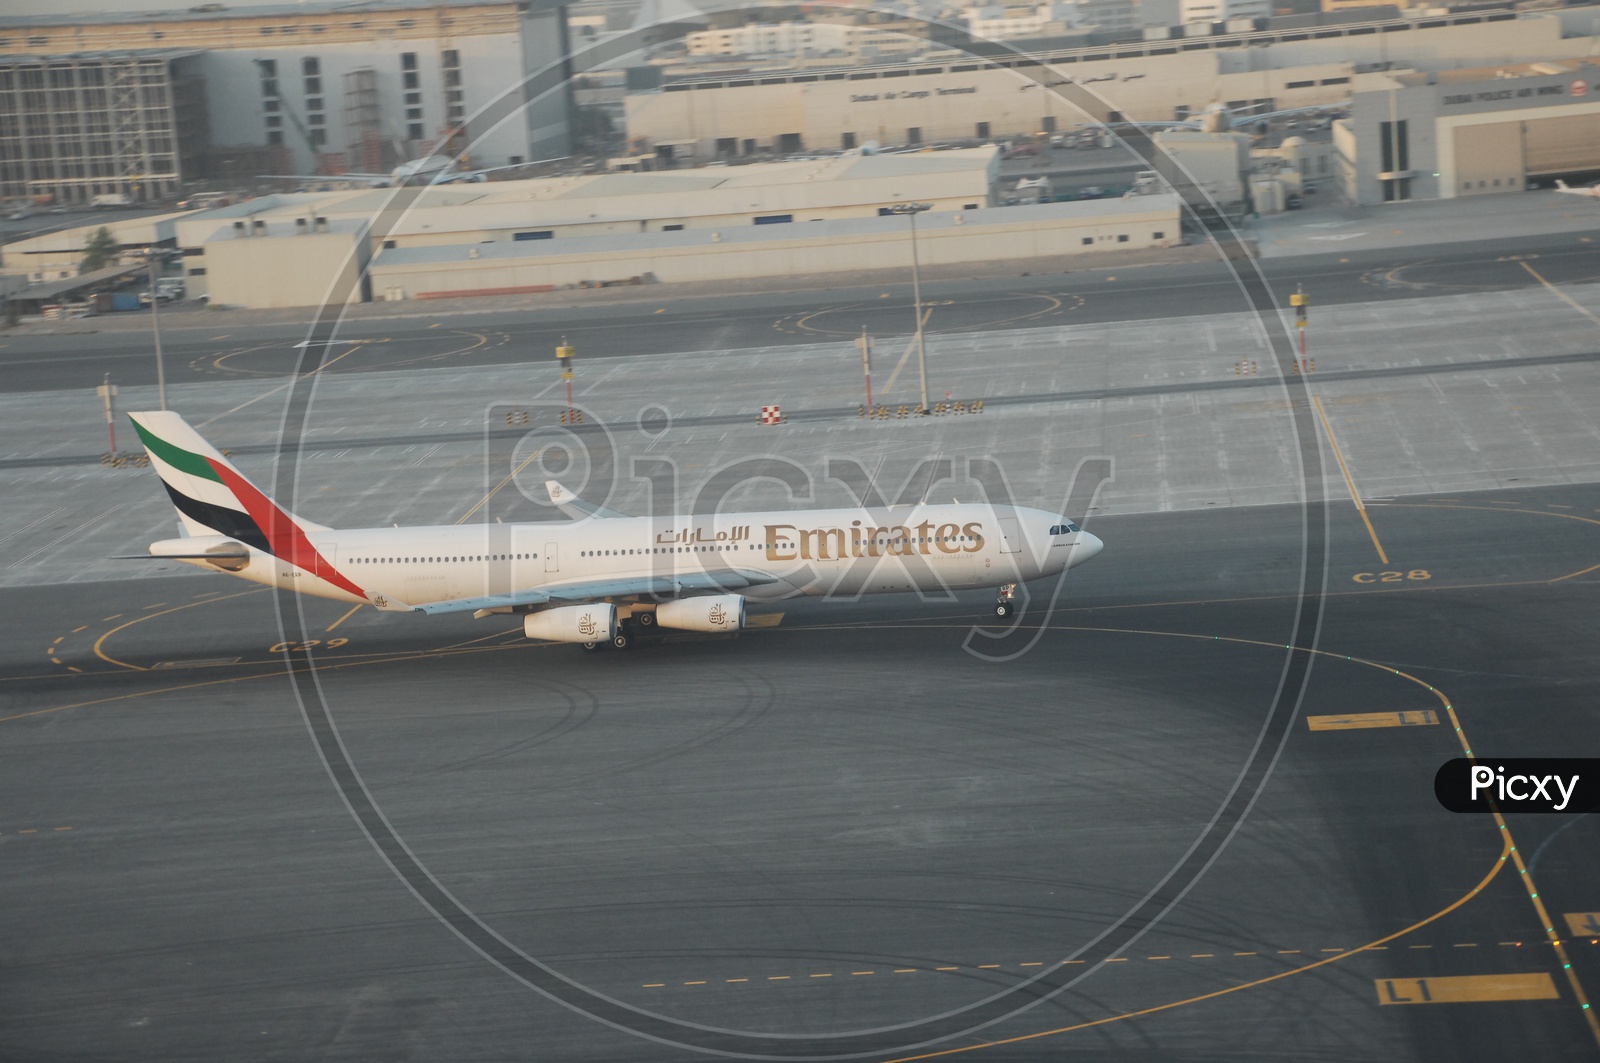 Emirates aircraft on runway about to take off